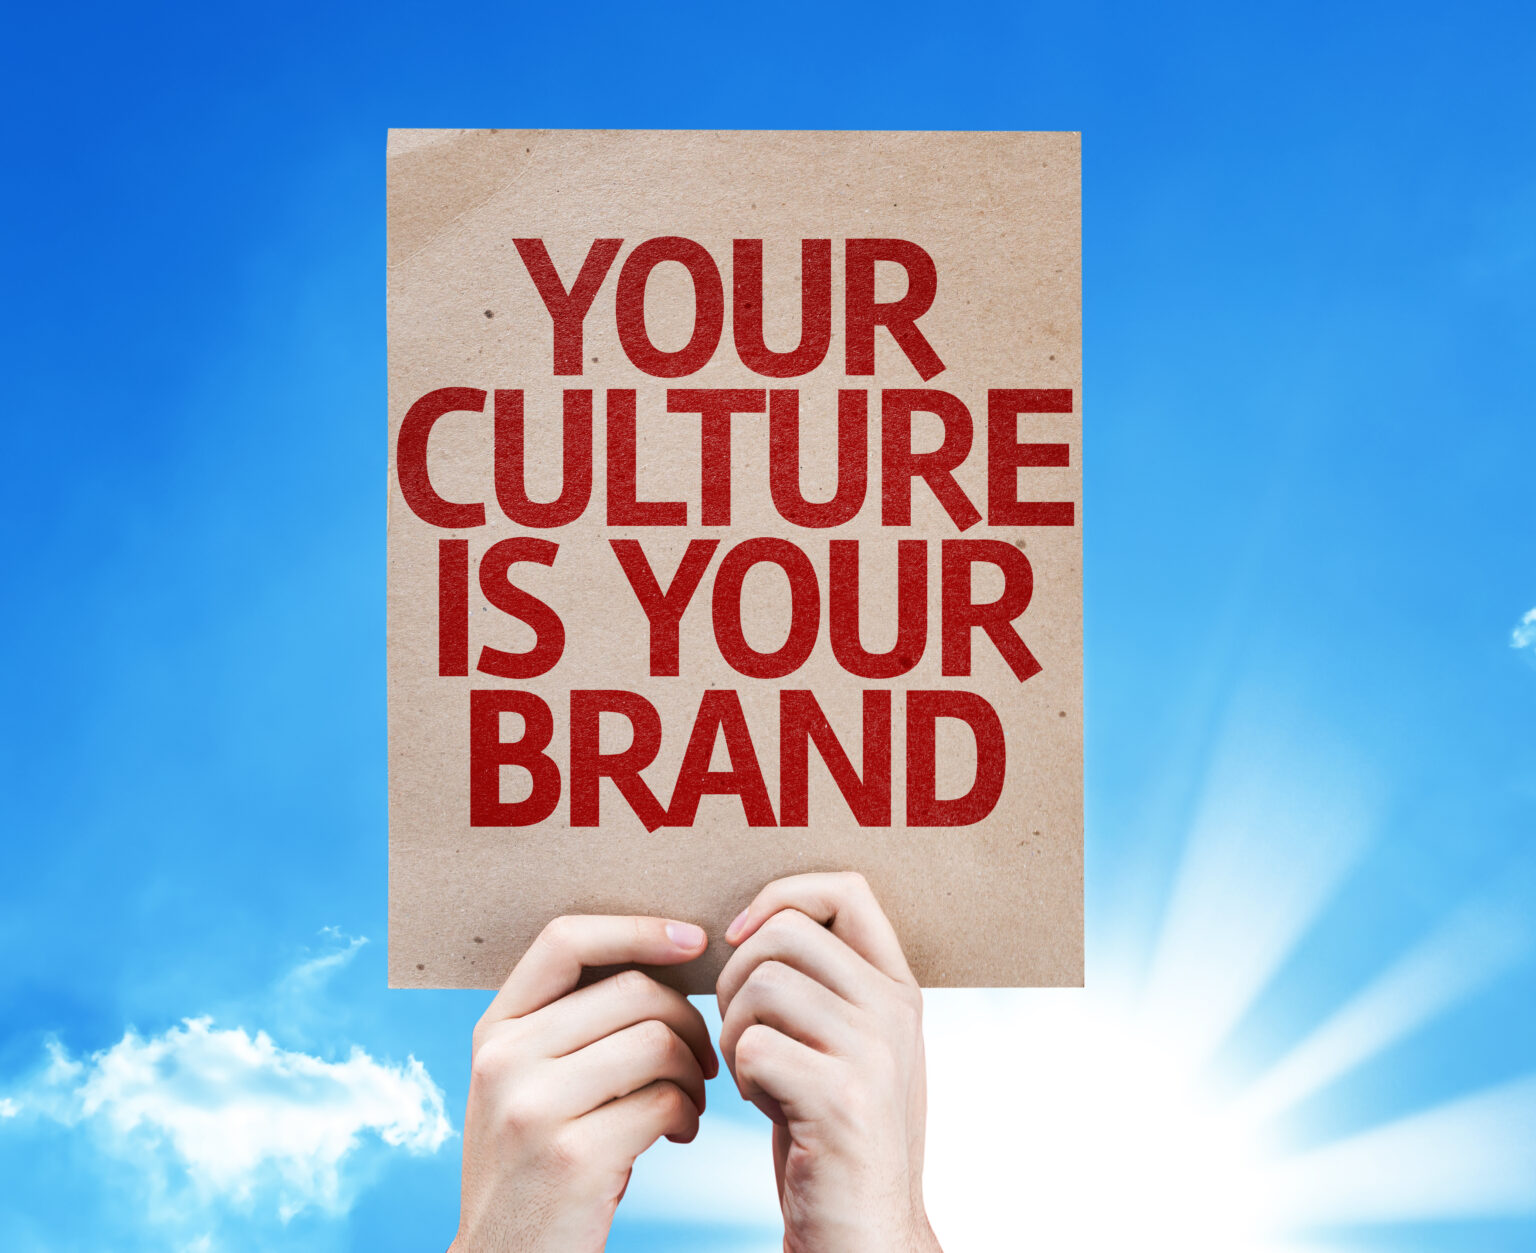 Your culture is your brand